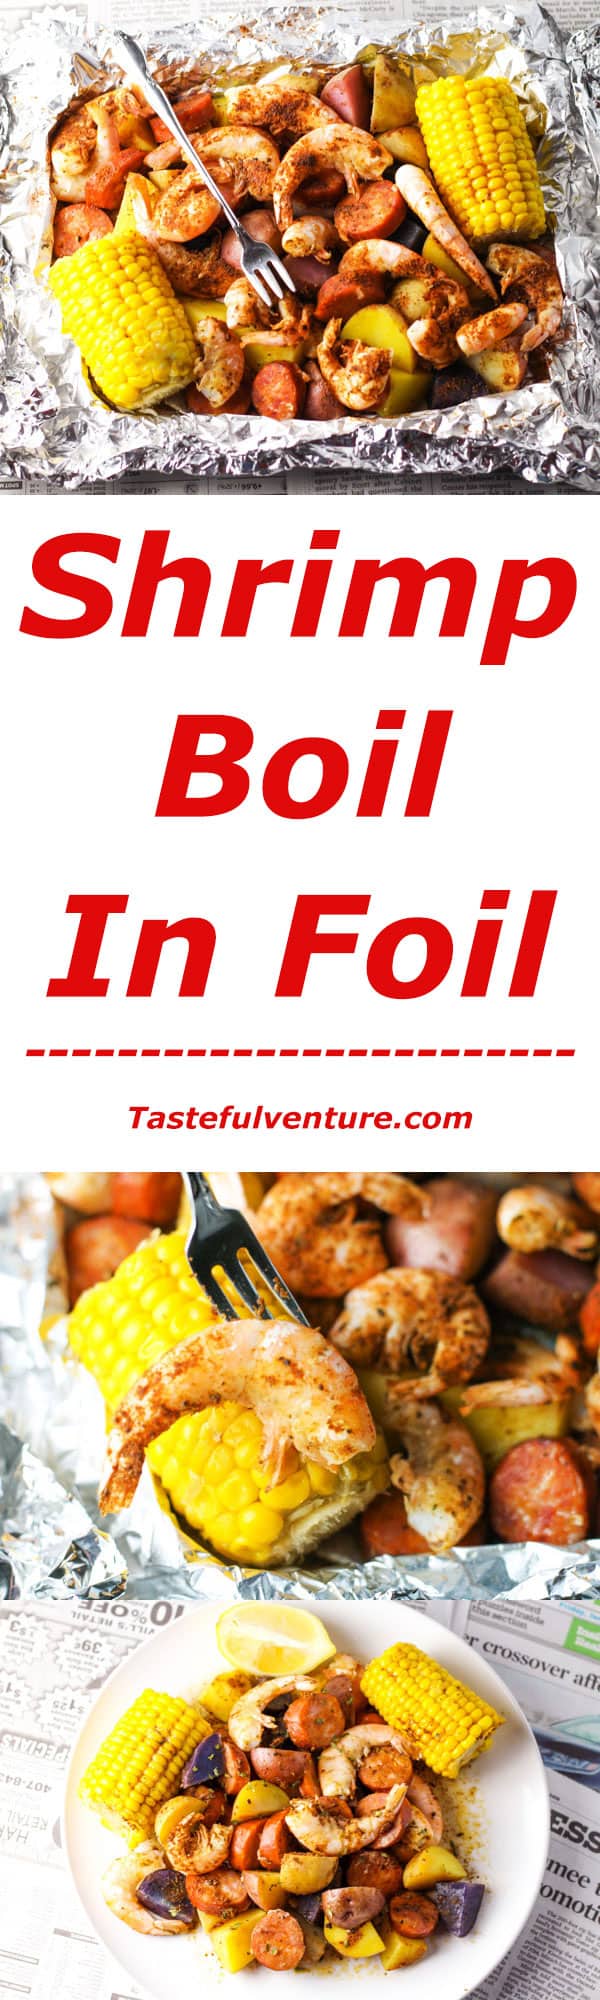 This Shrimp Boil in Foil is super easy to make. Just put everything in the foil, wrap it up, and bake it. This makes cleanup a breeze! | Tastefulventure.com